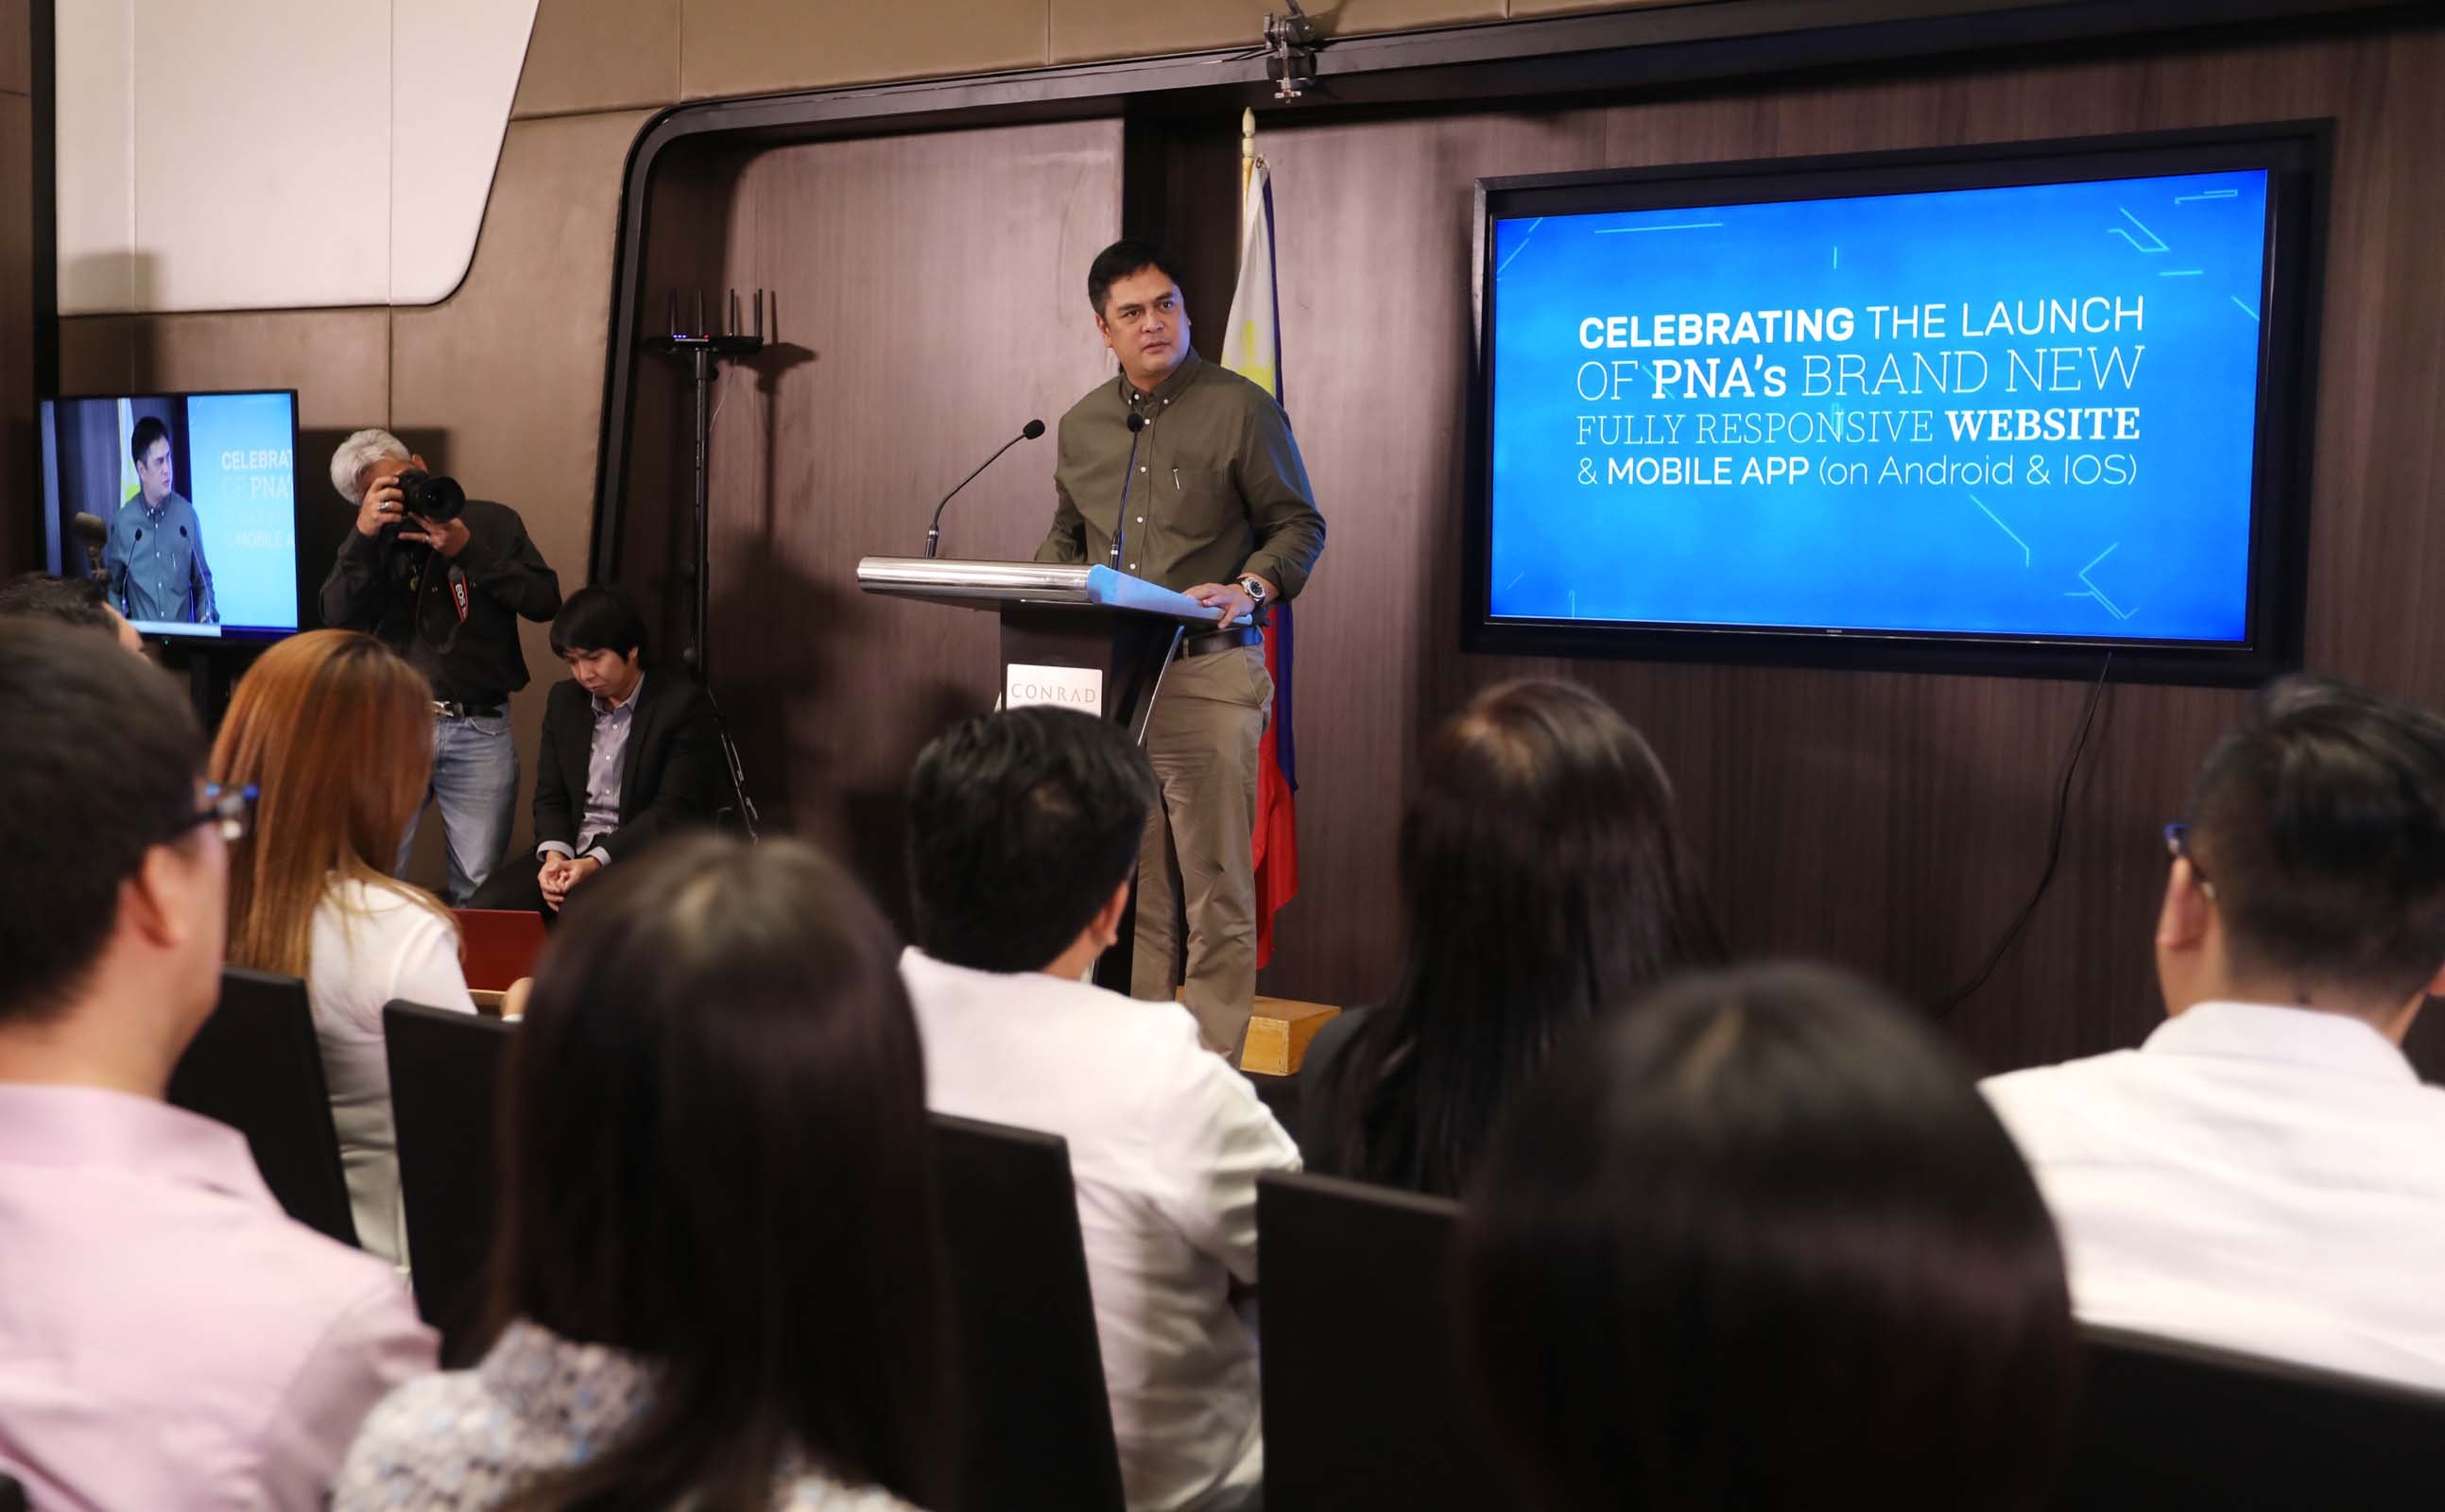 Secretary Andanar launches new PNA website and mobile app